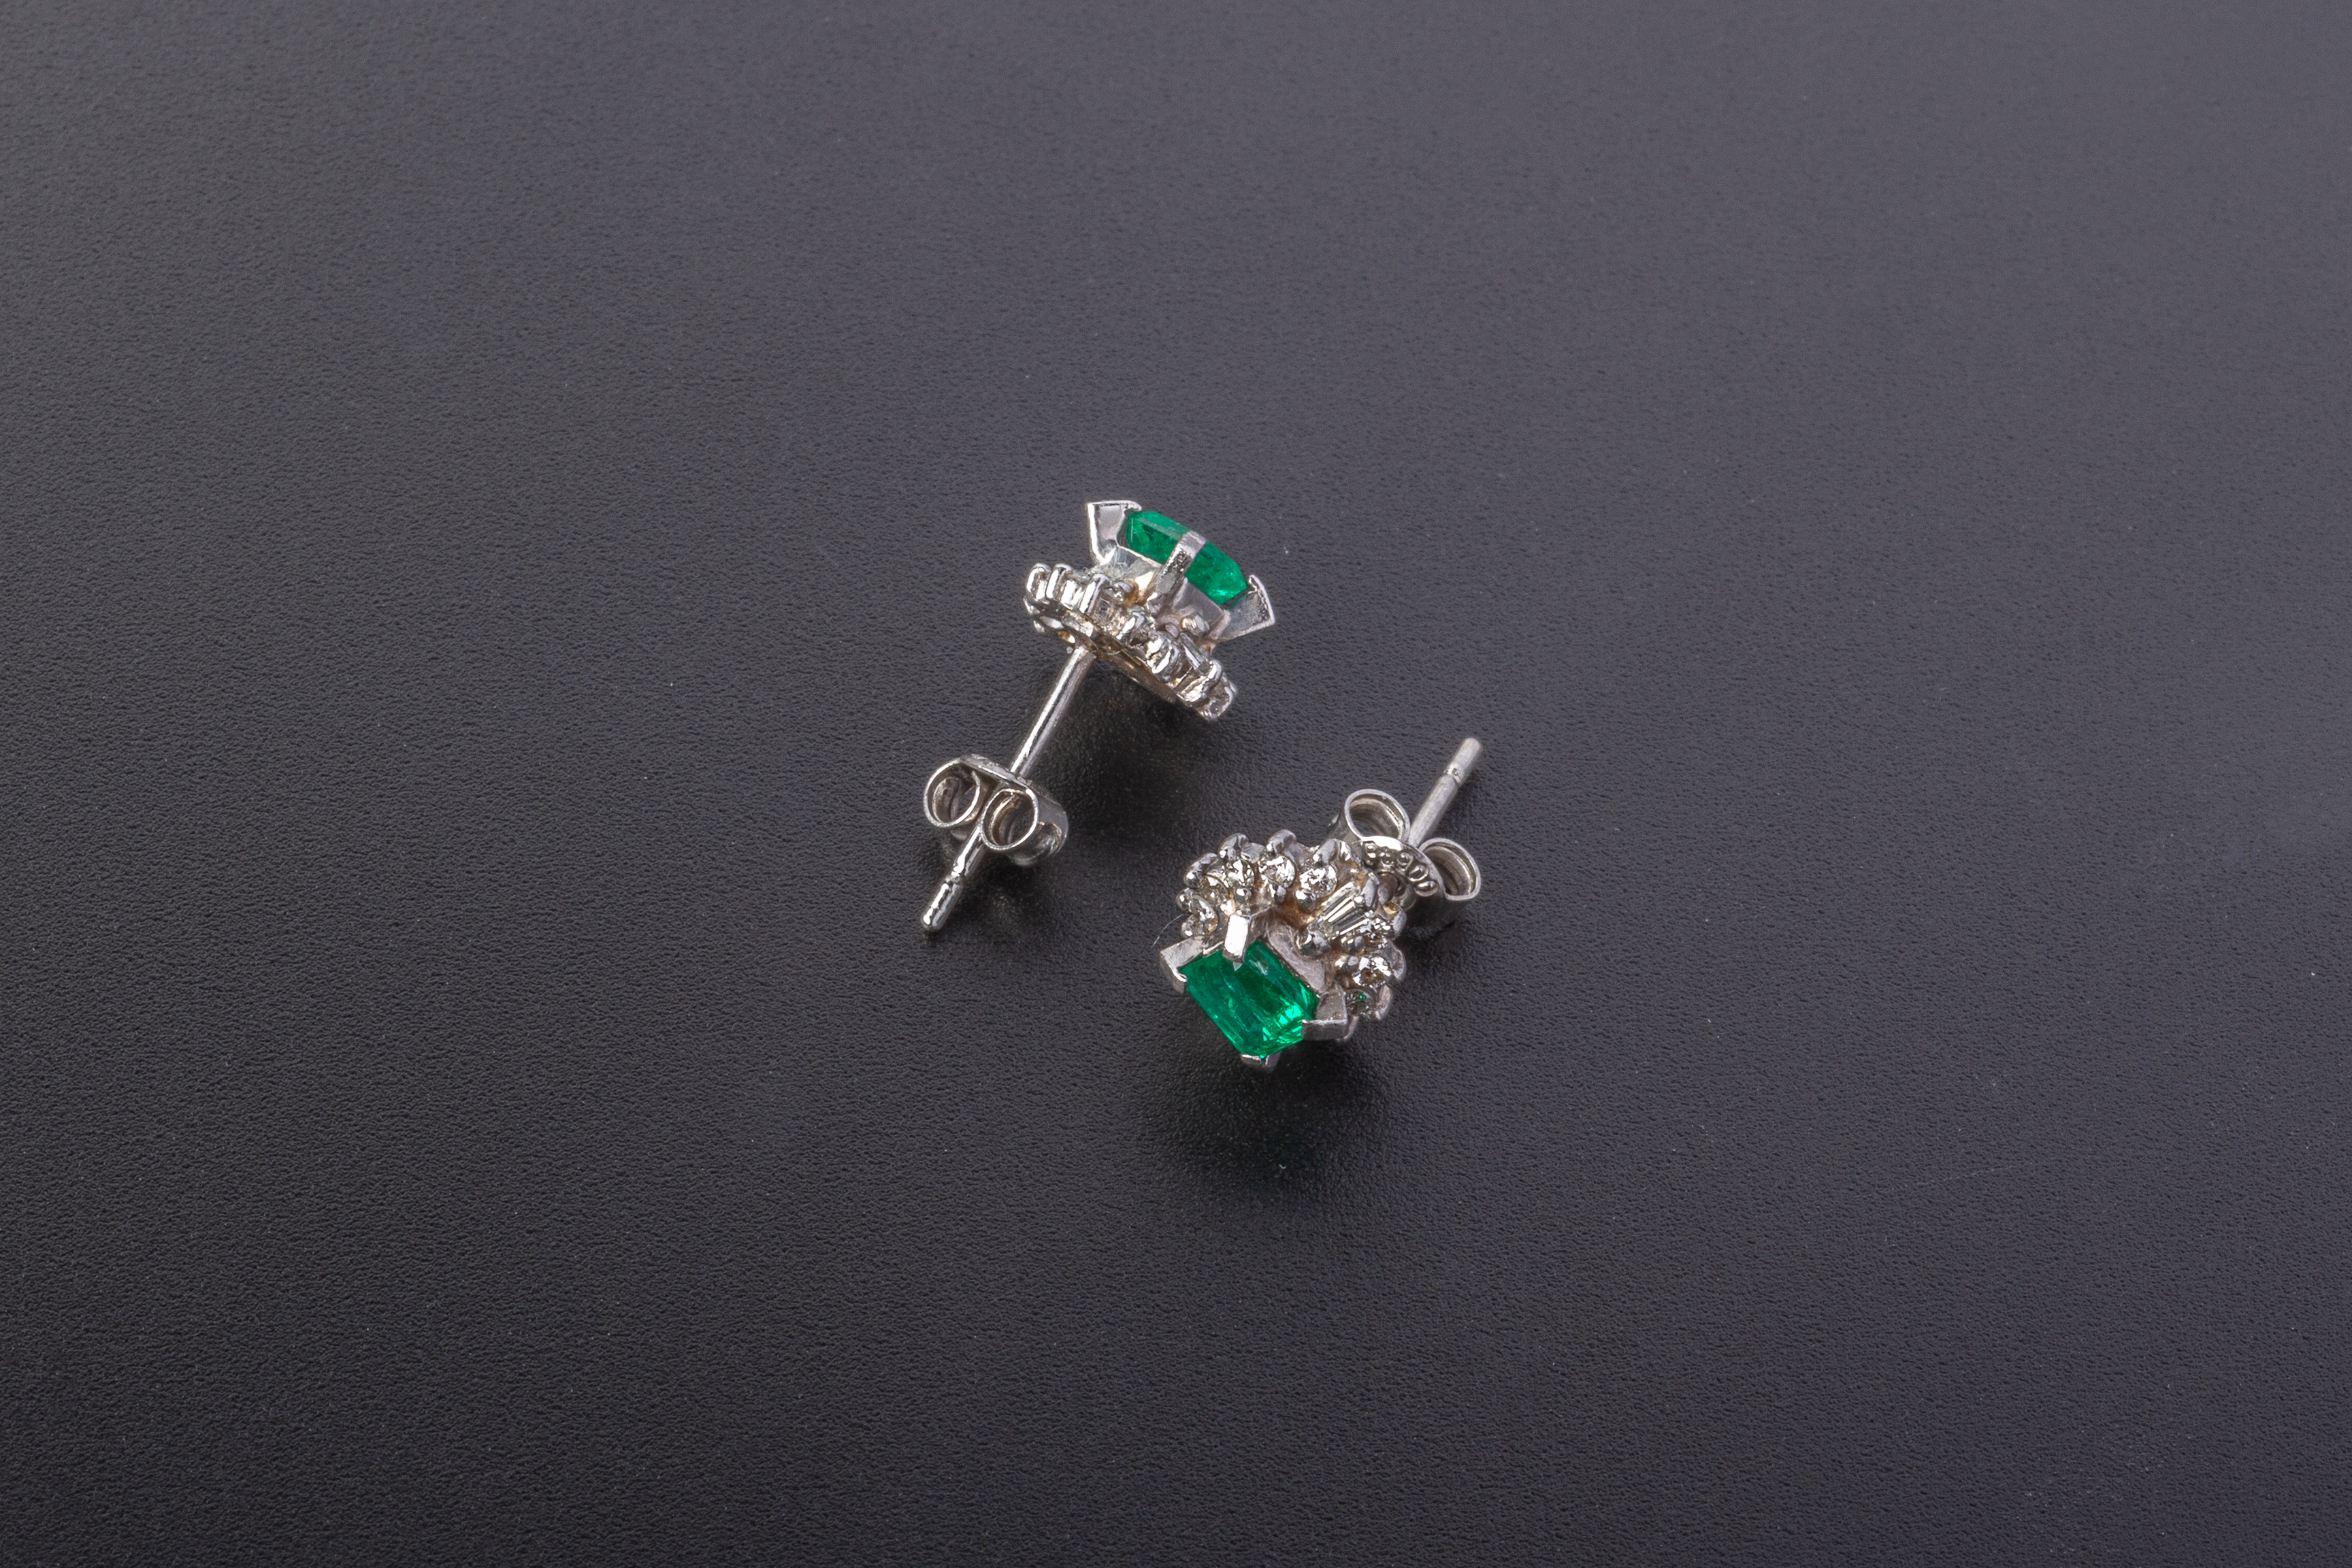 A PAIR OF EMERALD AND DIAMOND EARRINGS - Image 2 of 3